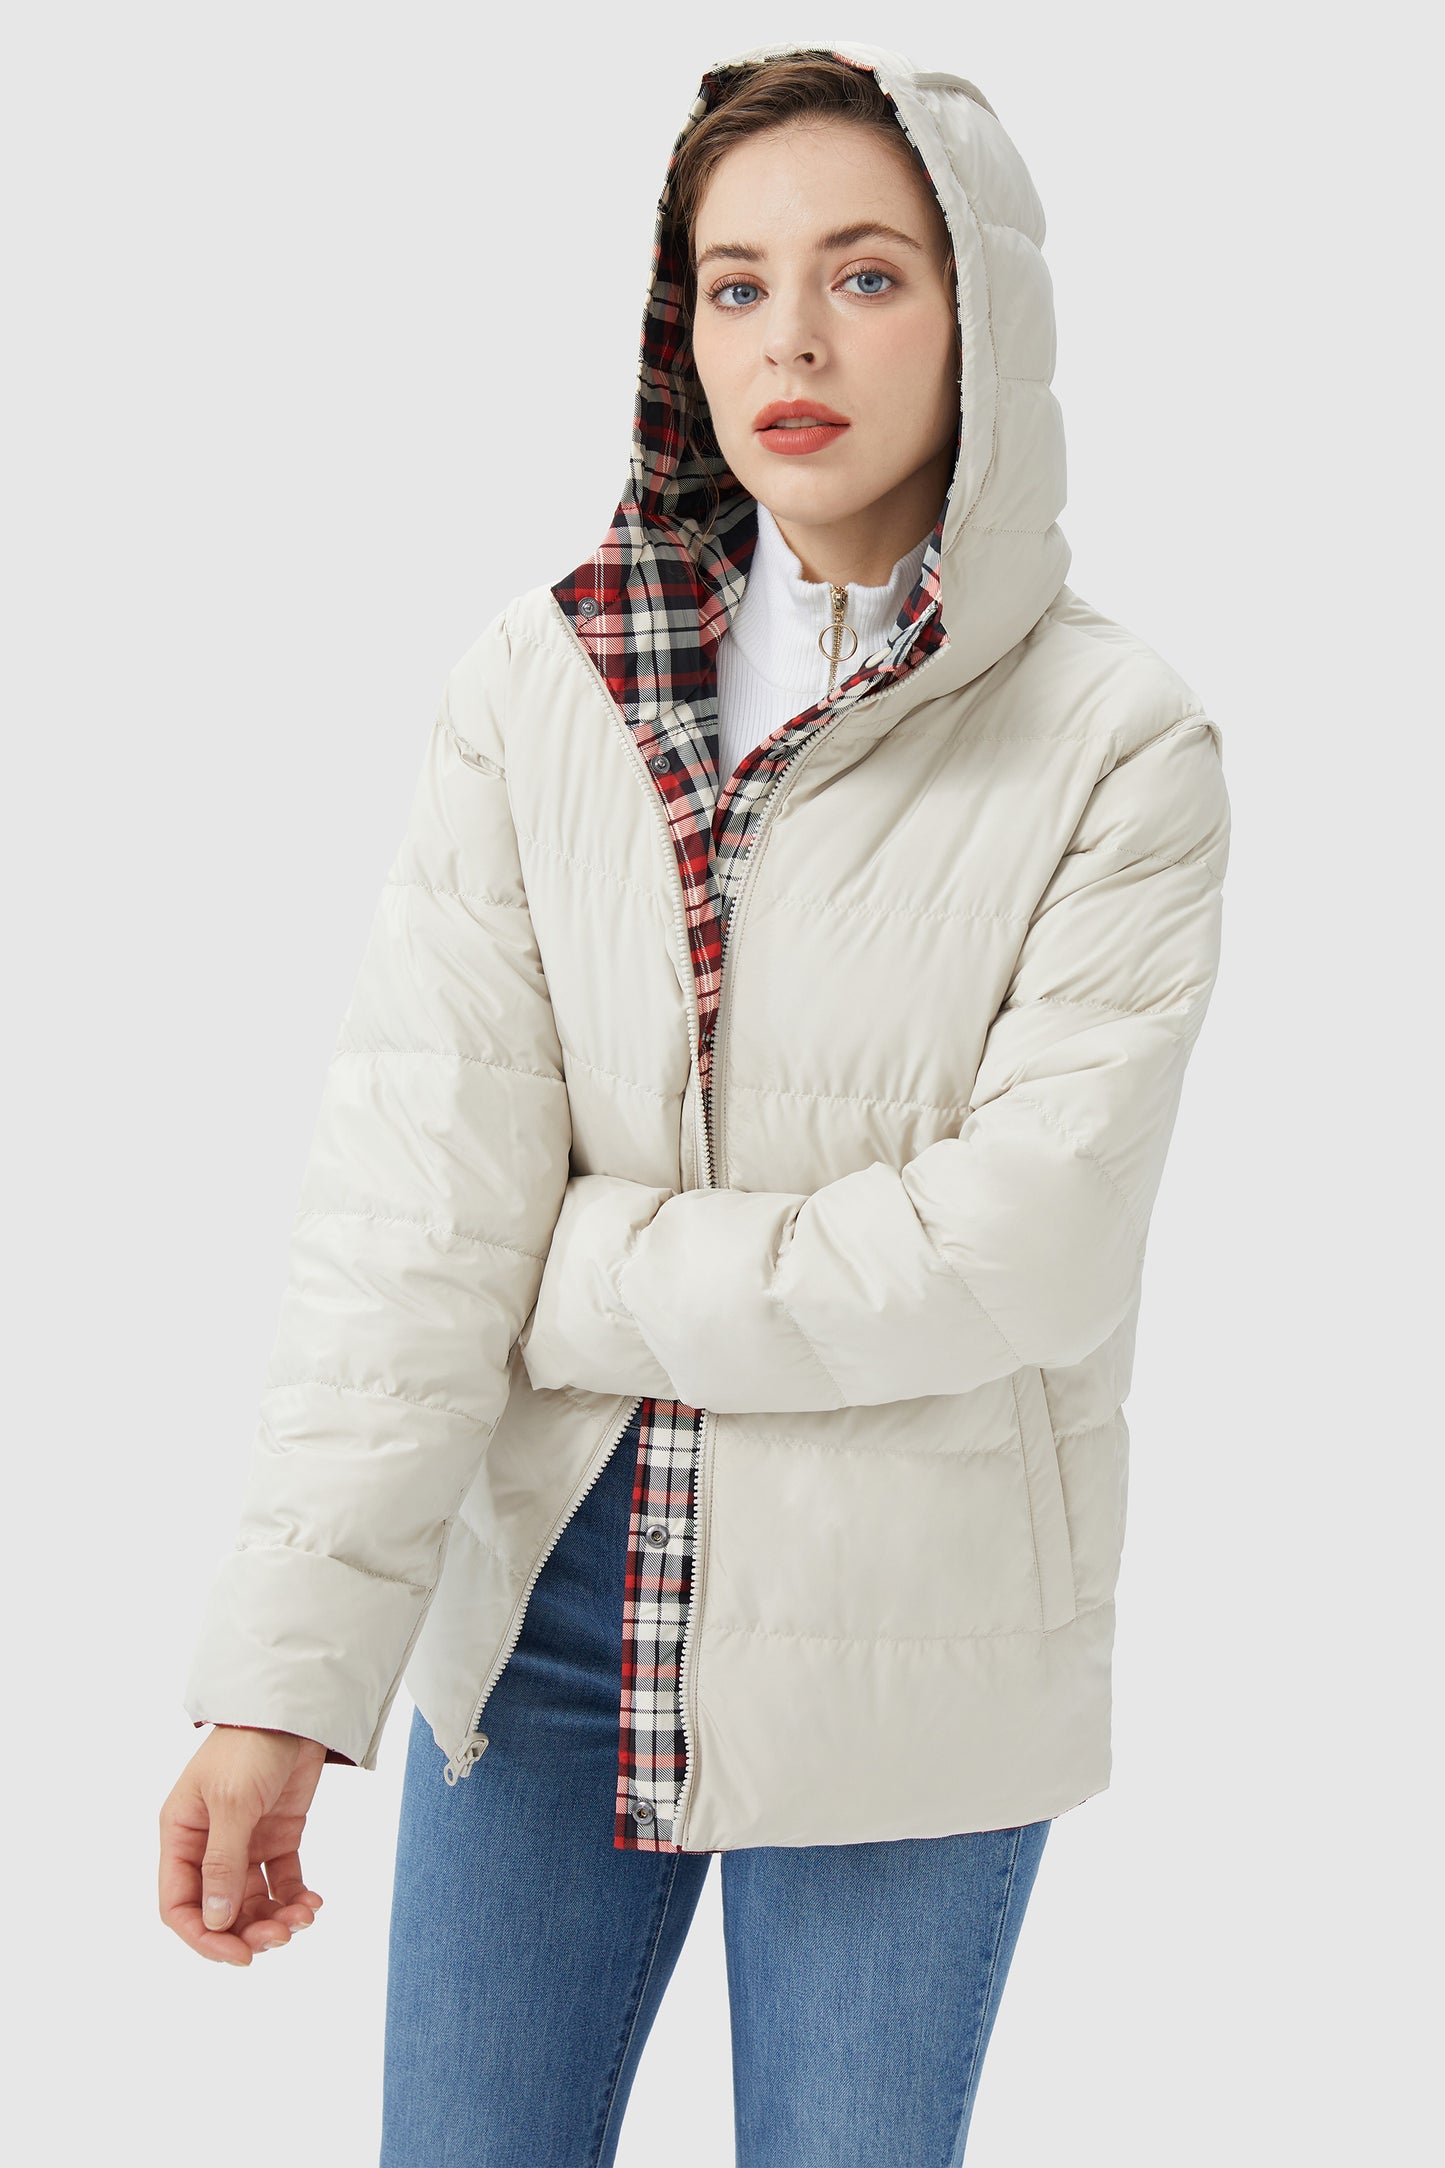 Lightweight Reversible Down Jacket with Hood